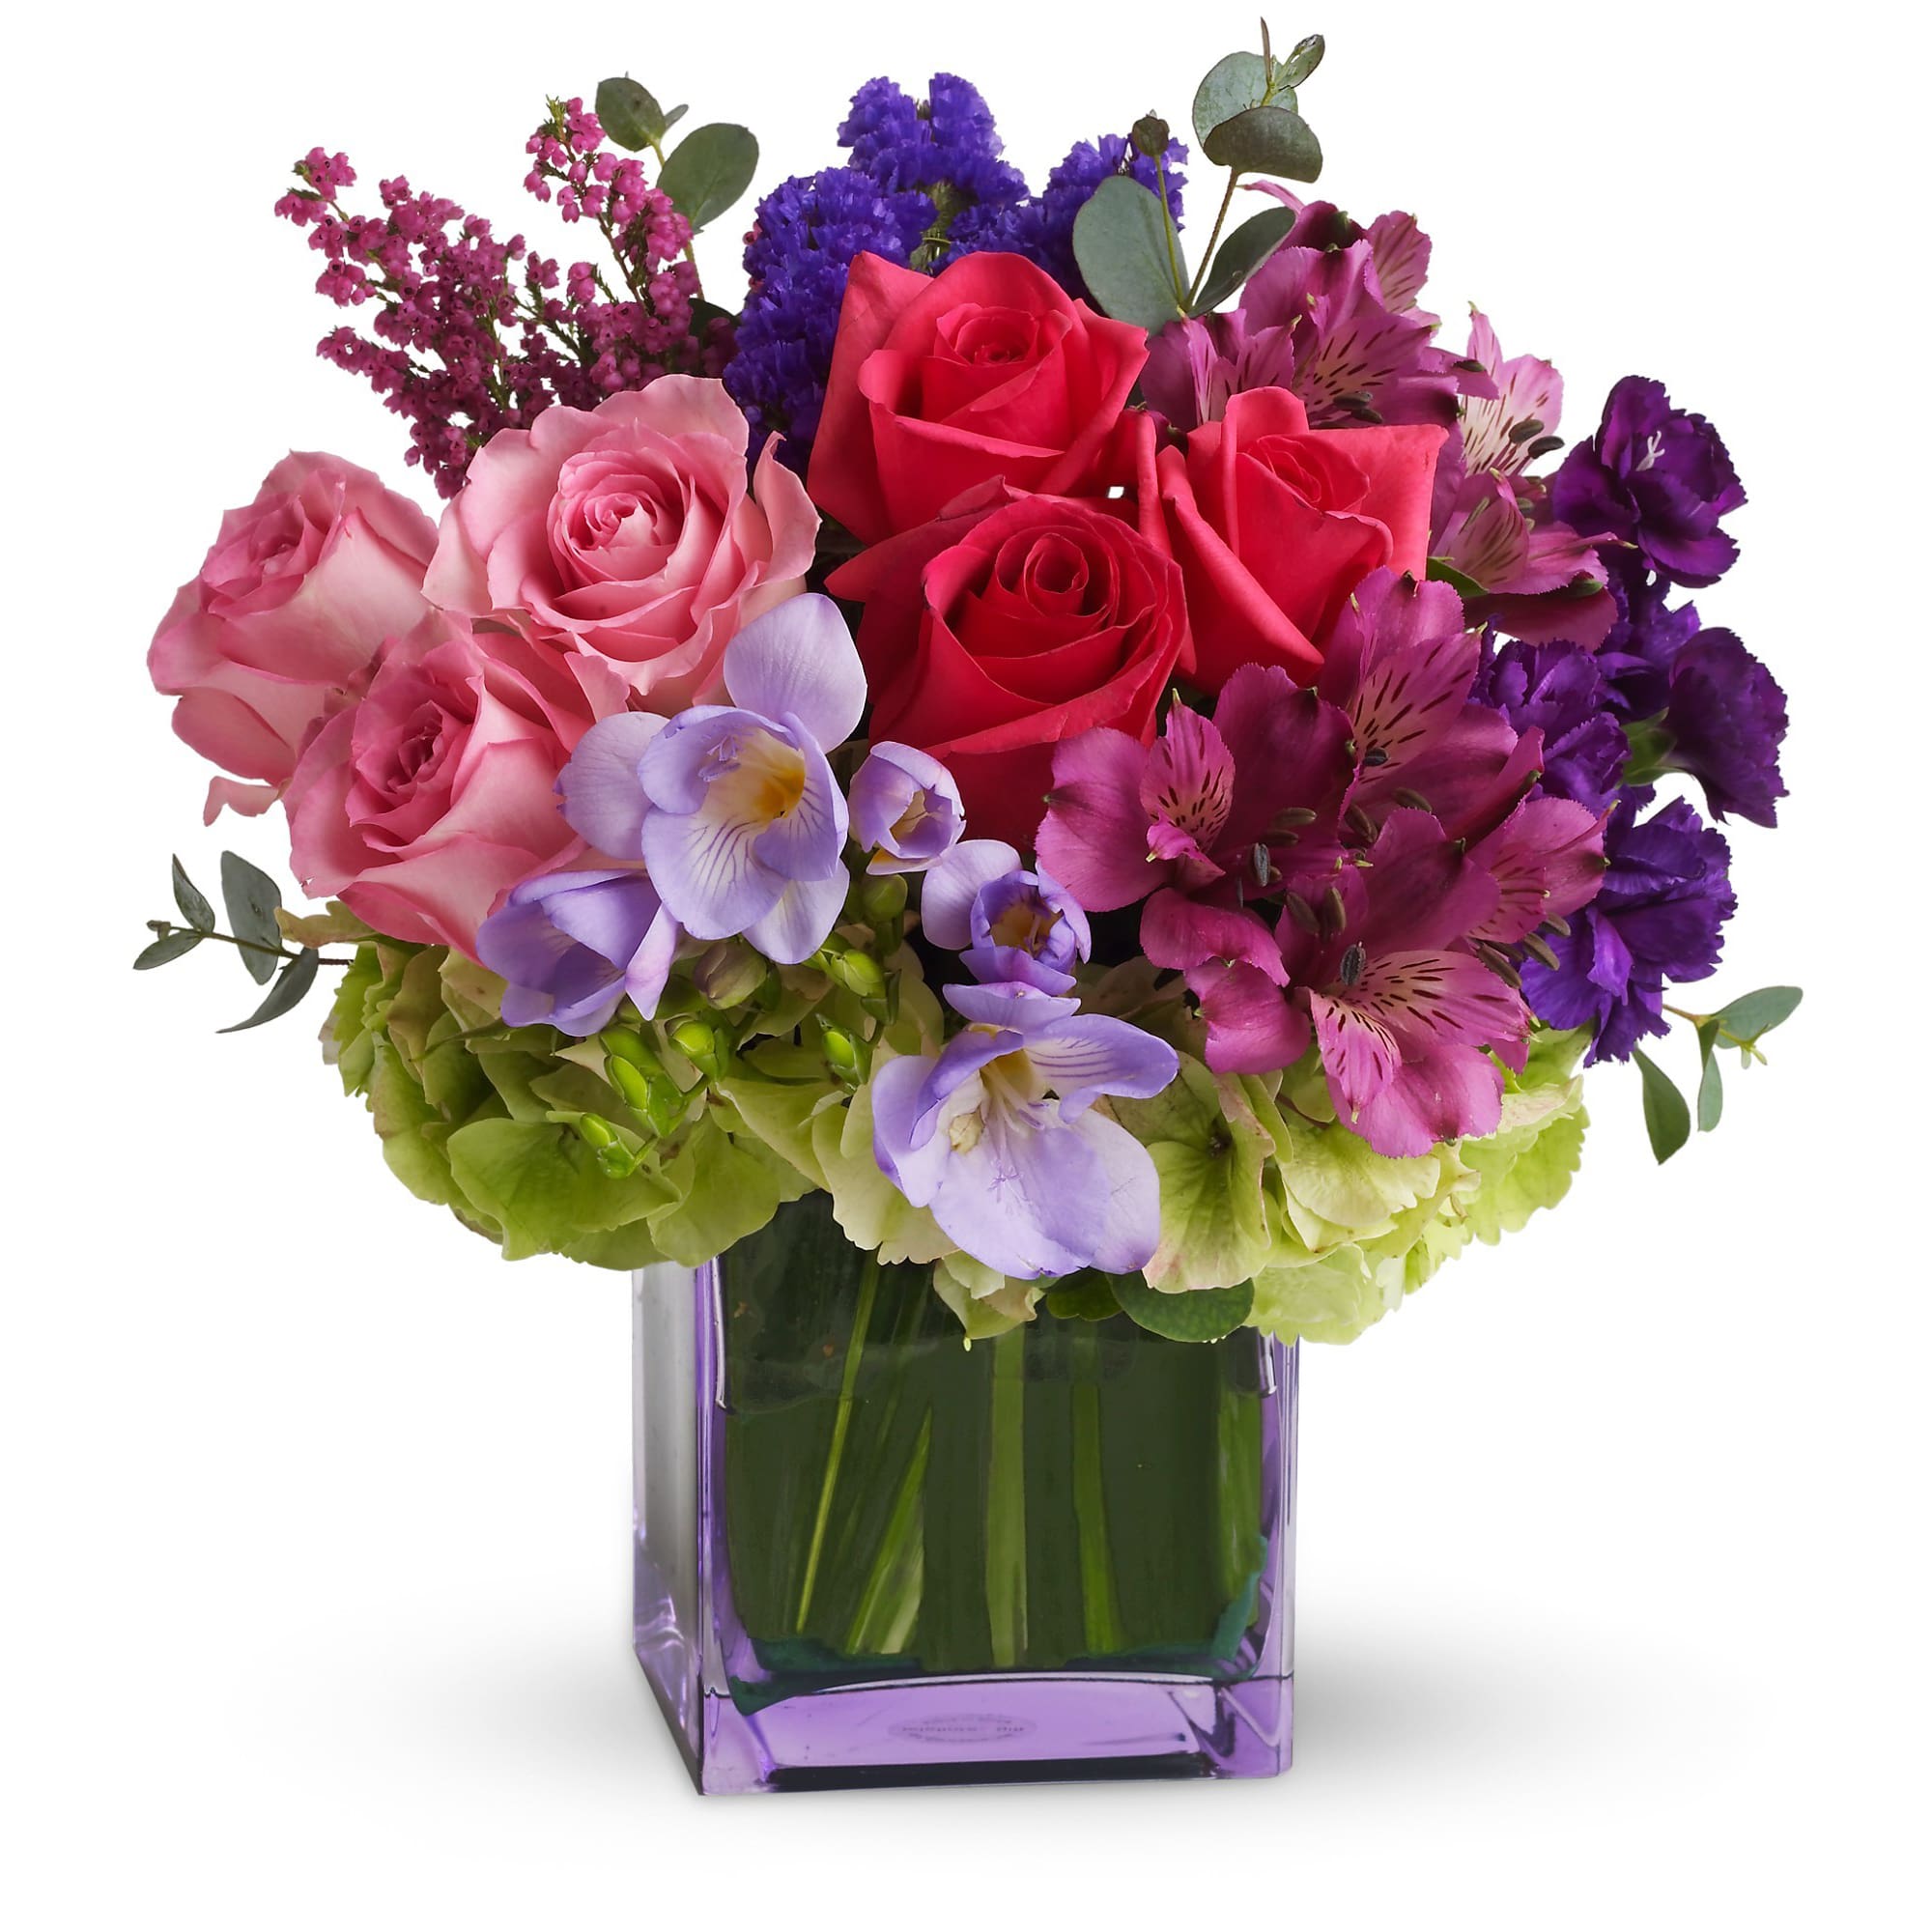 Exquisite Beauty by Teleflora - No other name could possibly describe this exquisitely beautiful bouquet. Its brilliant blossoms are gorgeously arranged and delivered in an exclusive lavender vase. Let her know how special she is to you by sending this fabulous gift.  Dazzling green hydrangea, hot pink and light pink roses, purple alstroemeria, mini carnations and statice, lavender freesia, pink heather and eucalyptus arrive in a lavender cube. Exquisitely exciting!  Approximately 10 1/2&quot; W x 11 1/2&quot; H  Orientation: One-Sided      As Shown : T48-2A     Deluxe : T48-2B     Premium : T48-2C  